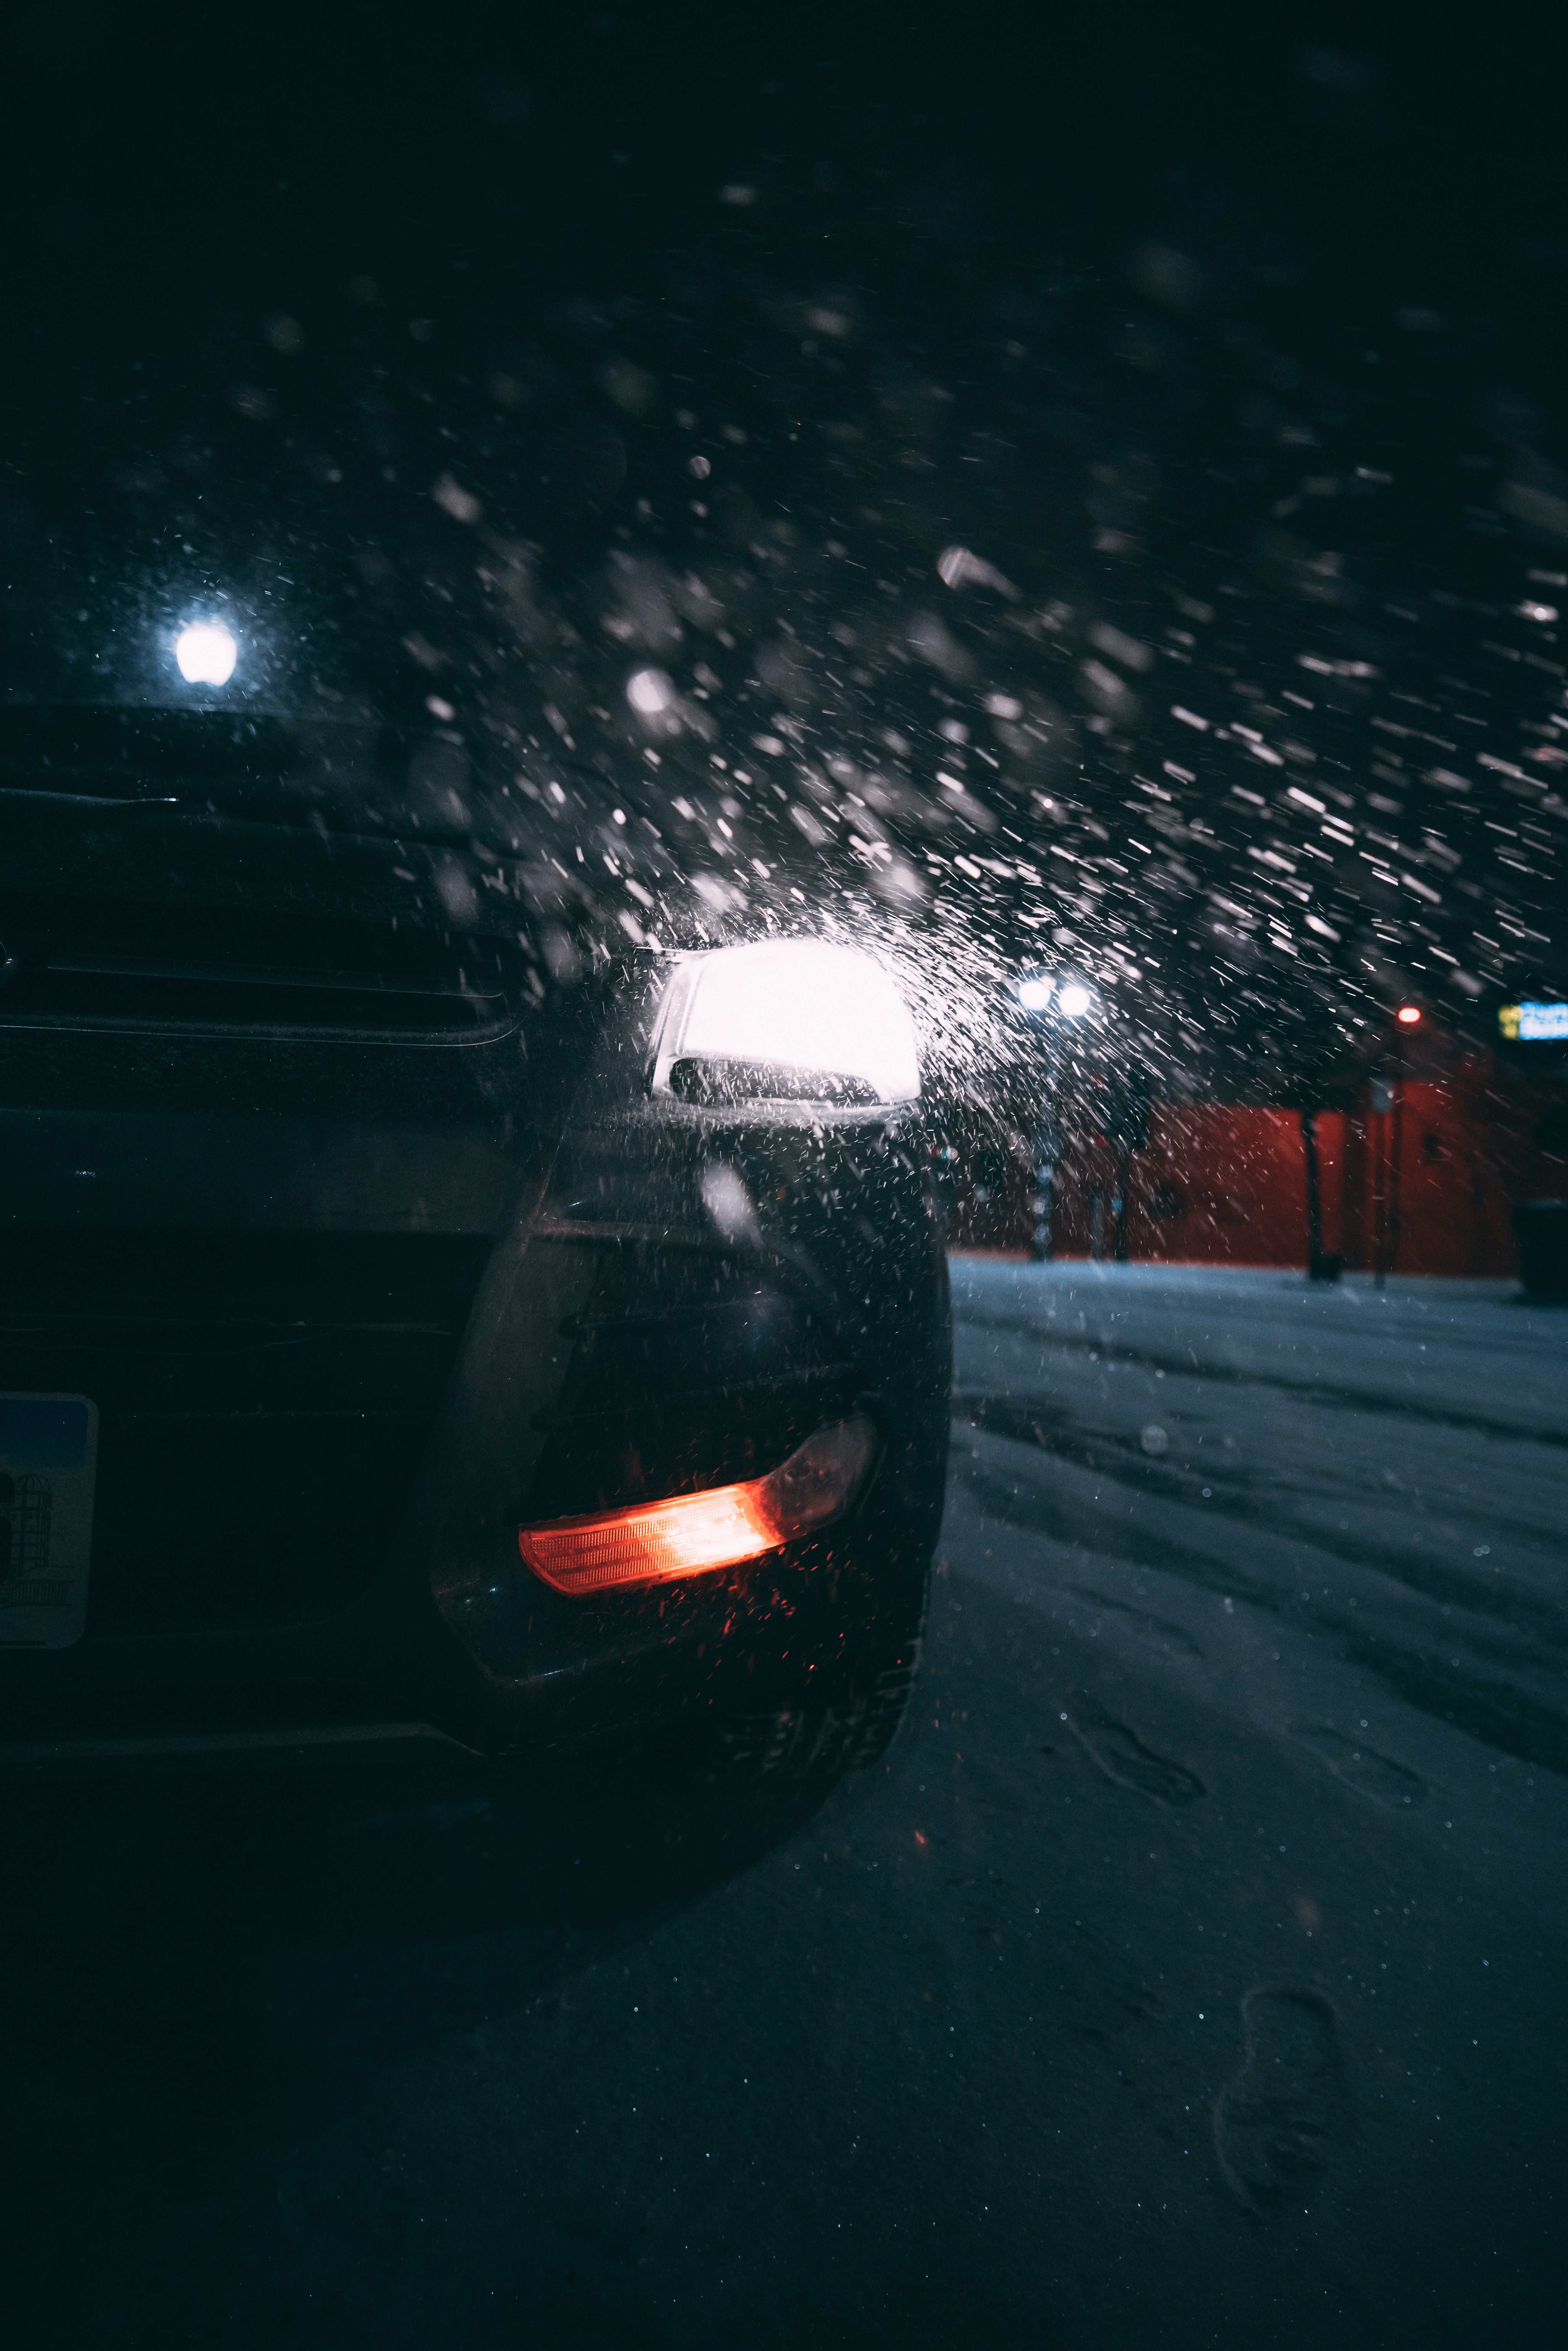 PC Wallpapers night, snow, cars, lights, car, back view, rear view, headlights